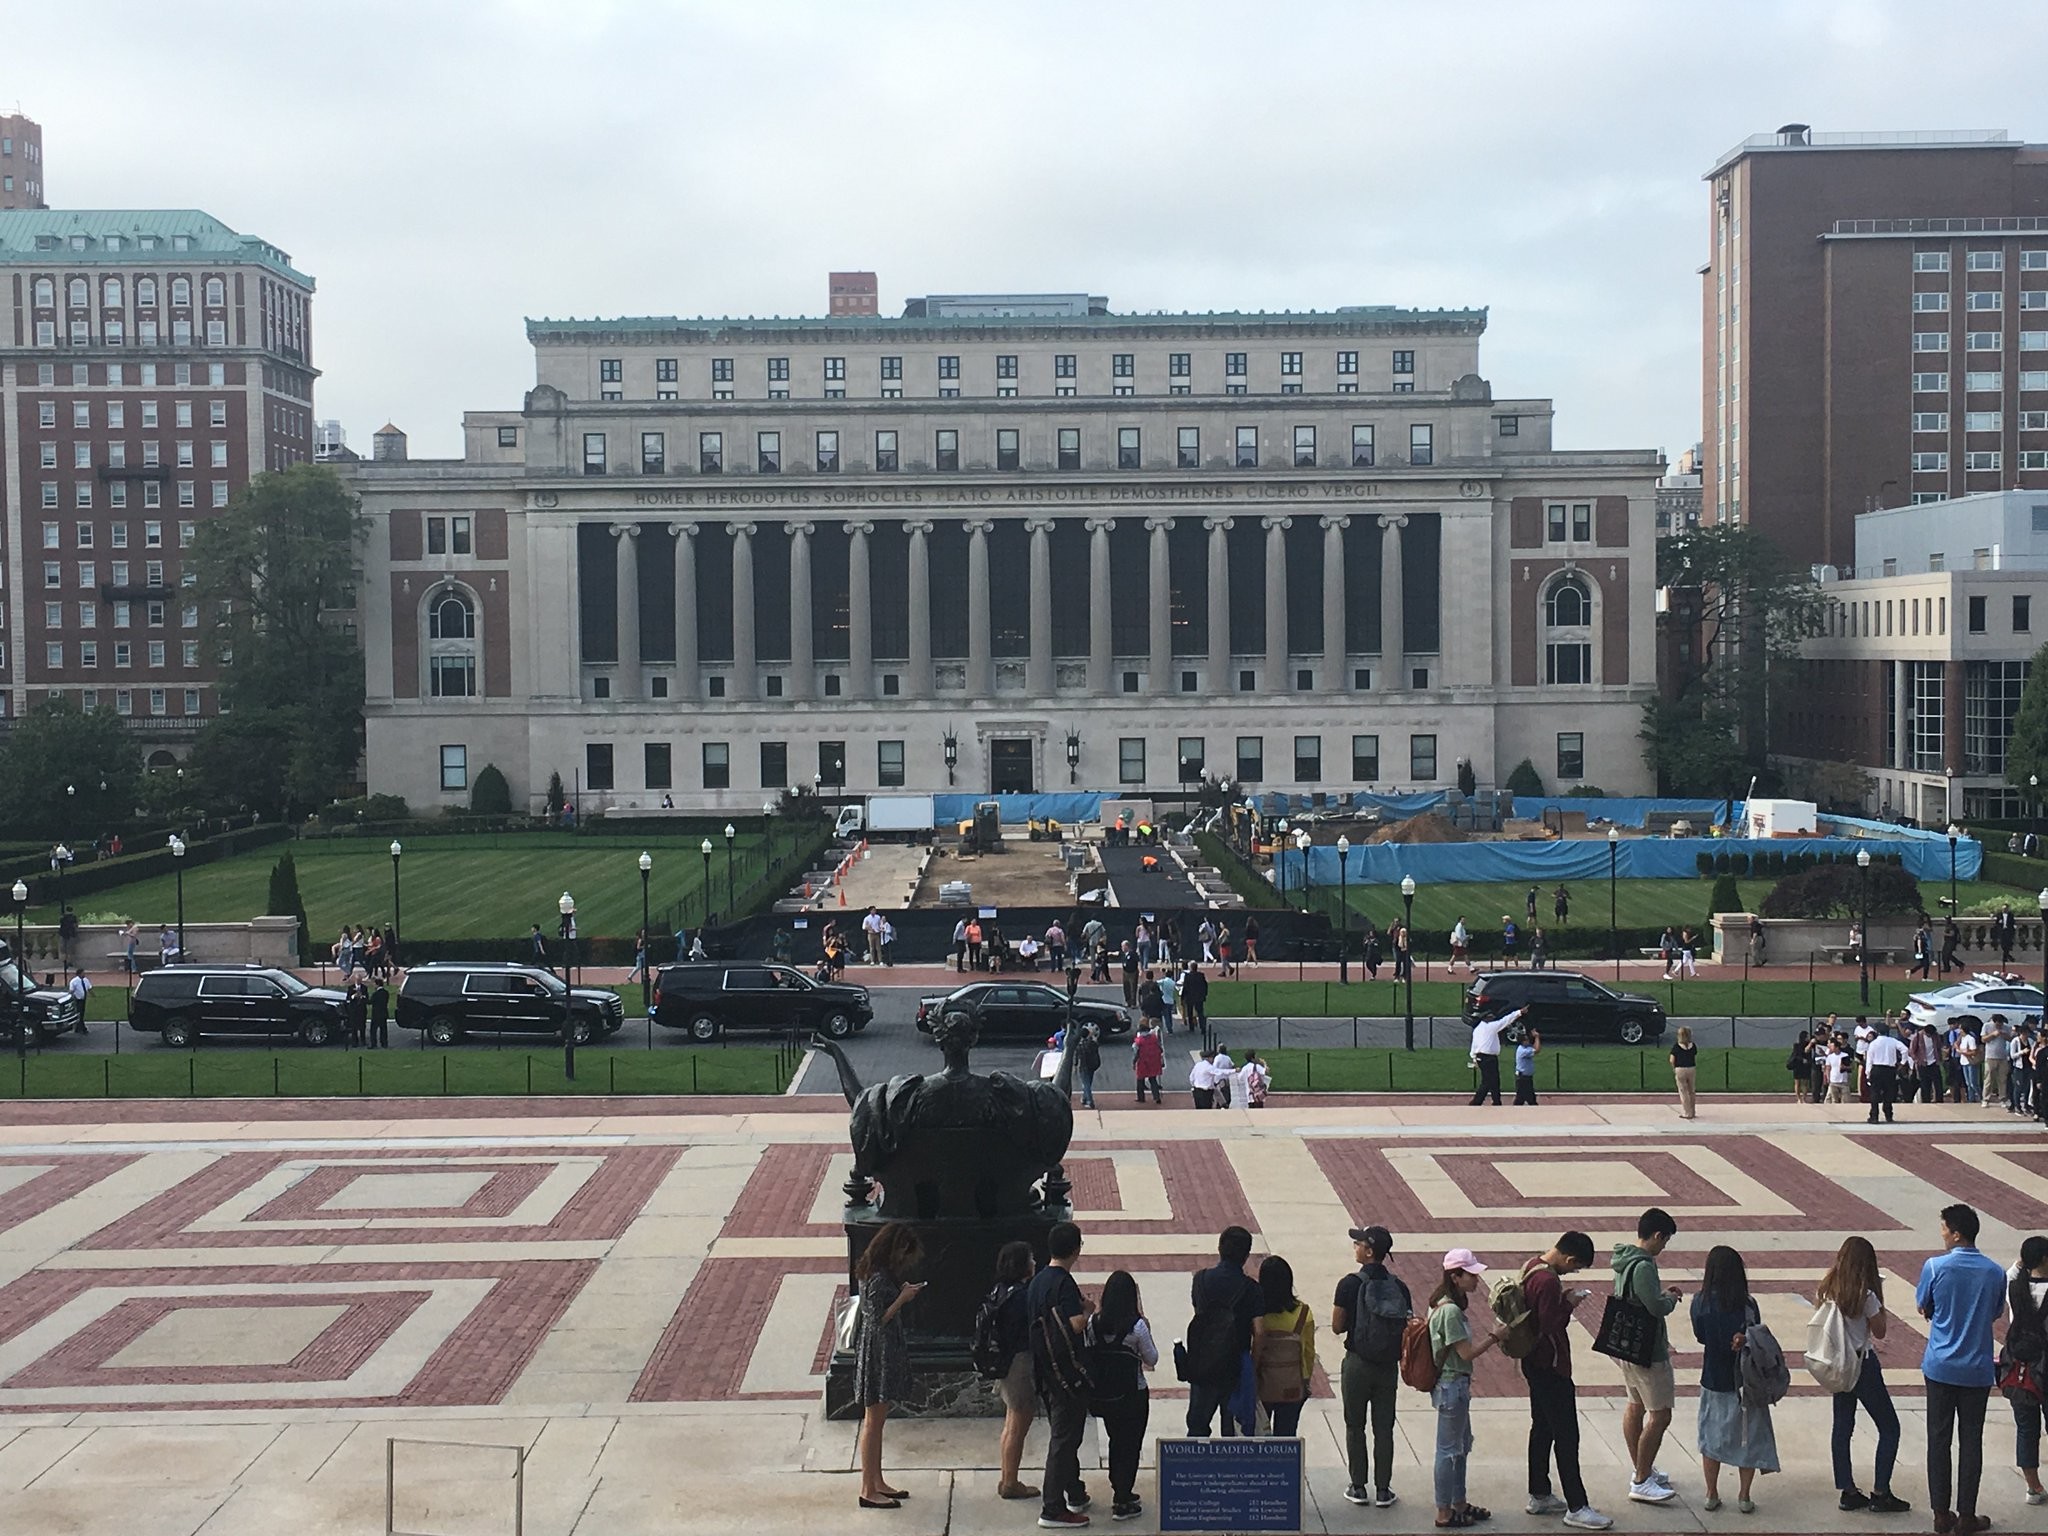 2048x1536 Columbia University on Twitter: "This morning, we welcome Liu Yandong, Vice  Premier of the People's Republic of China, for the U.S. – China University  ...